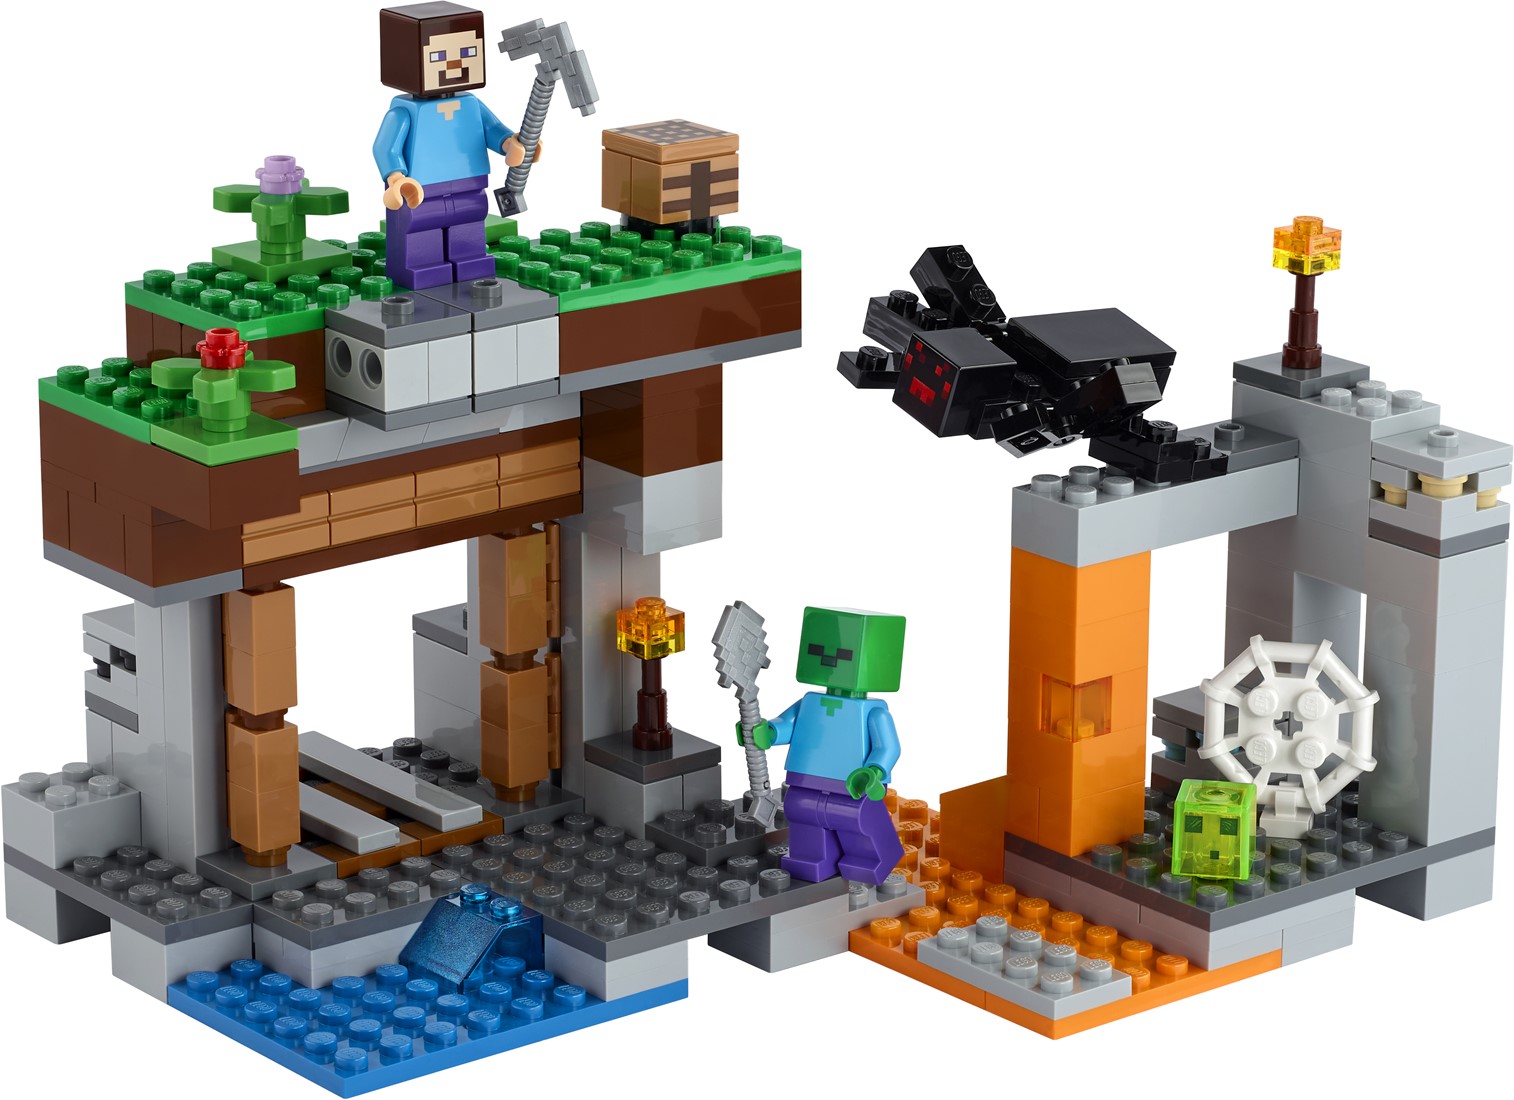 Two New LEGO Minecraft Sets Found - The Brick Fan